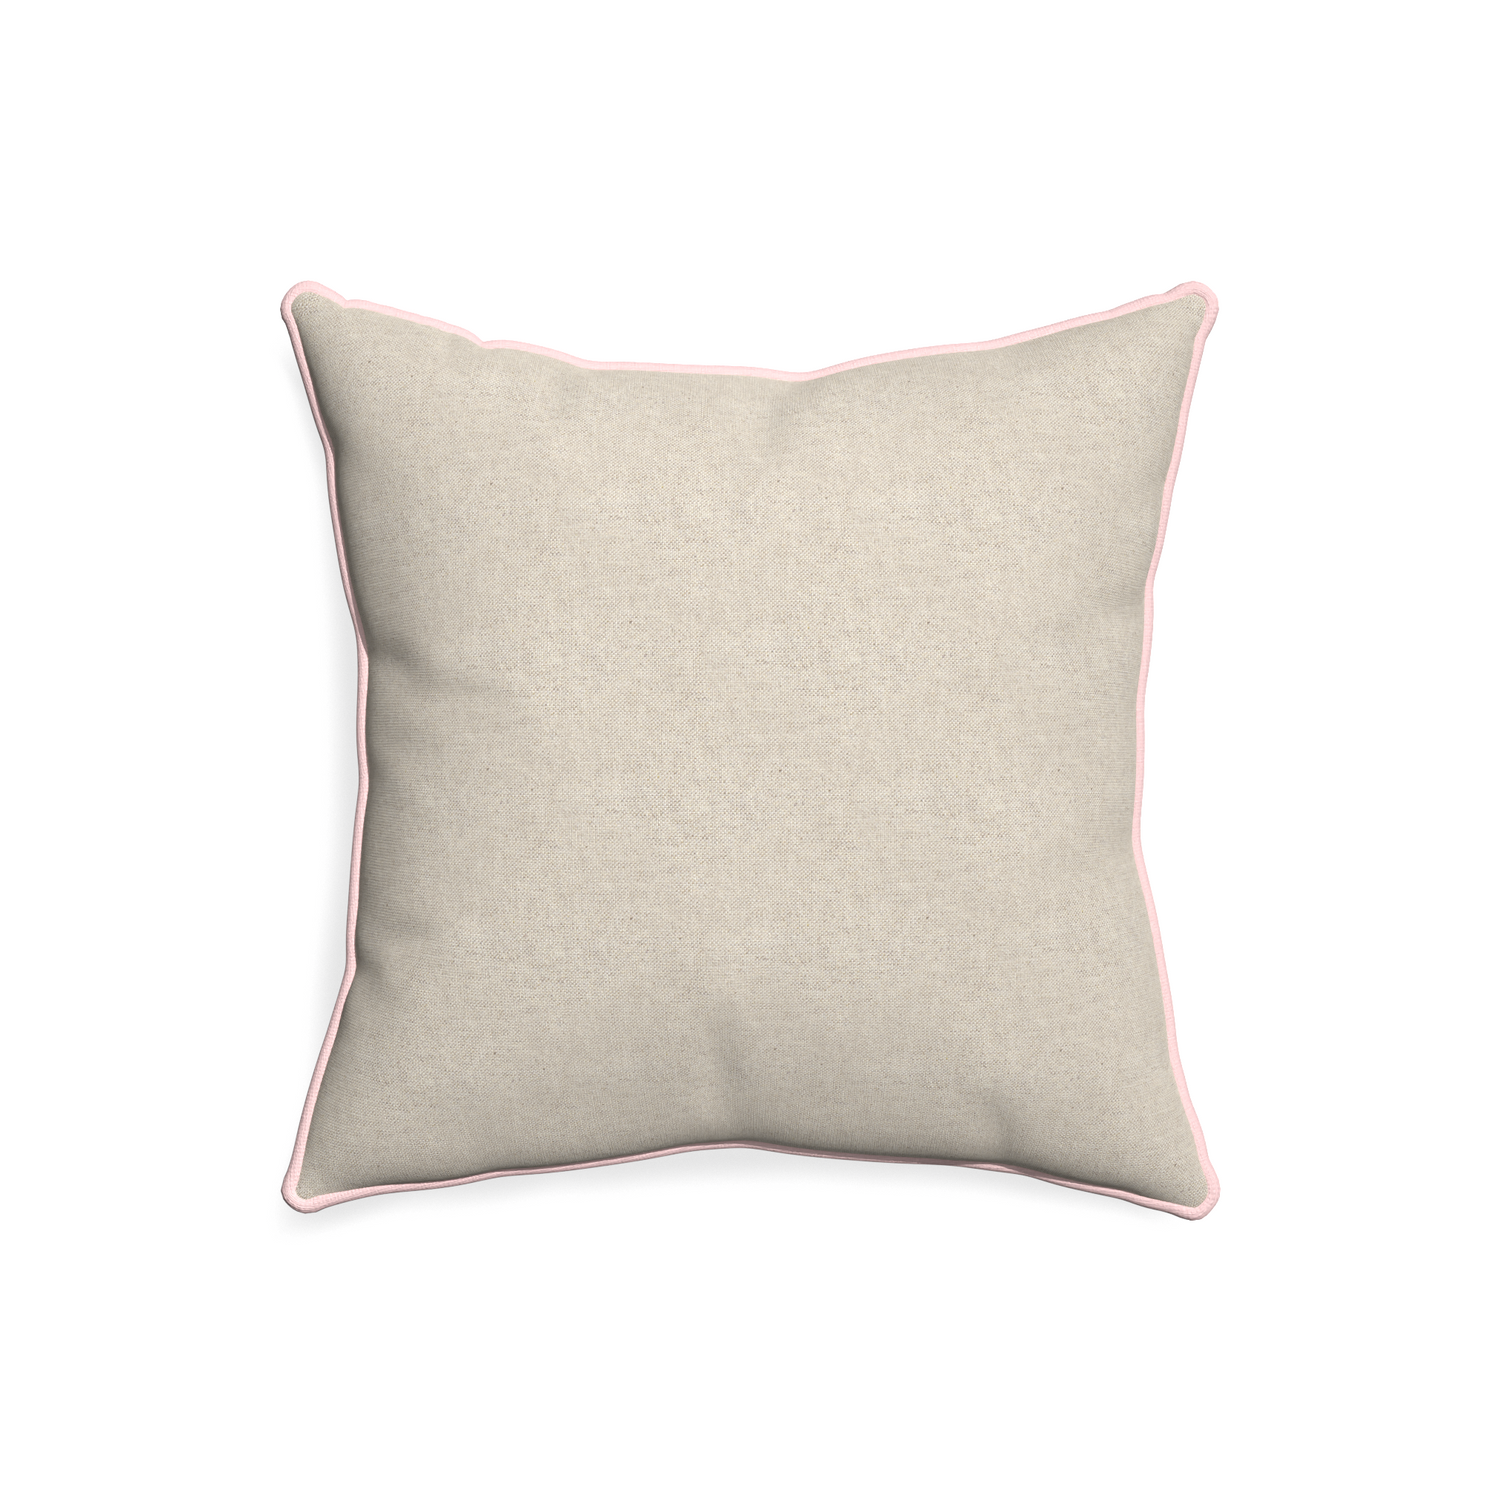 20-square oat custom pillow with petal piping on white background